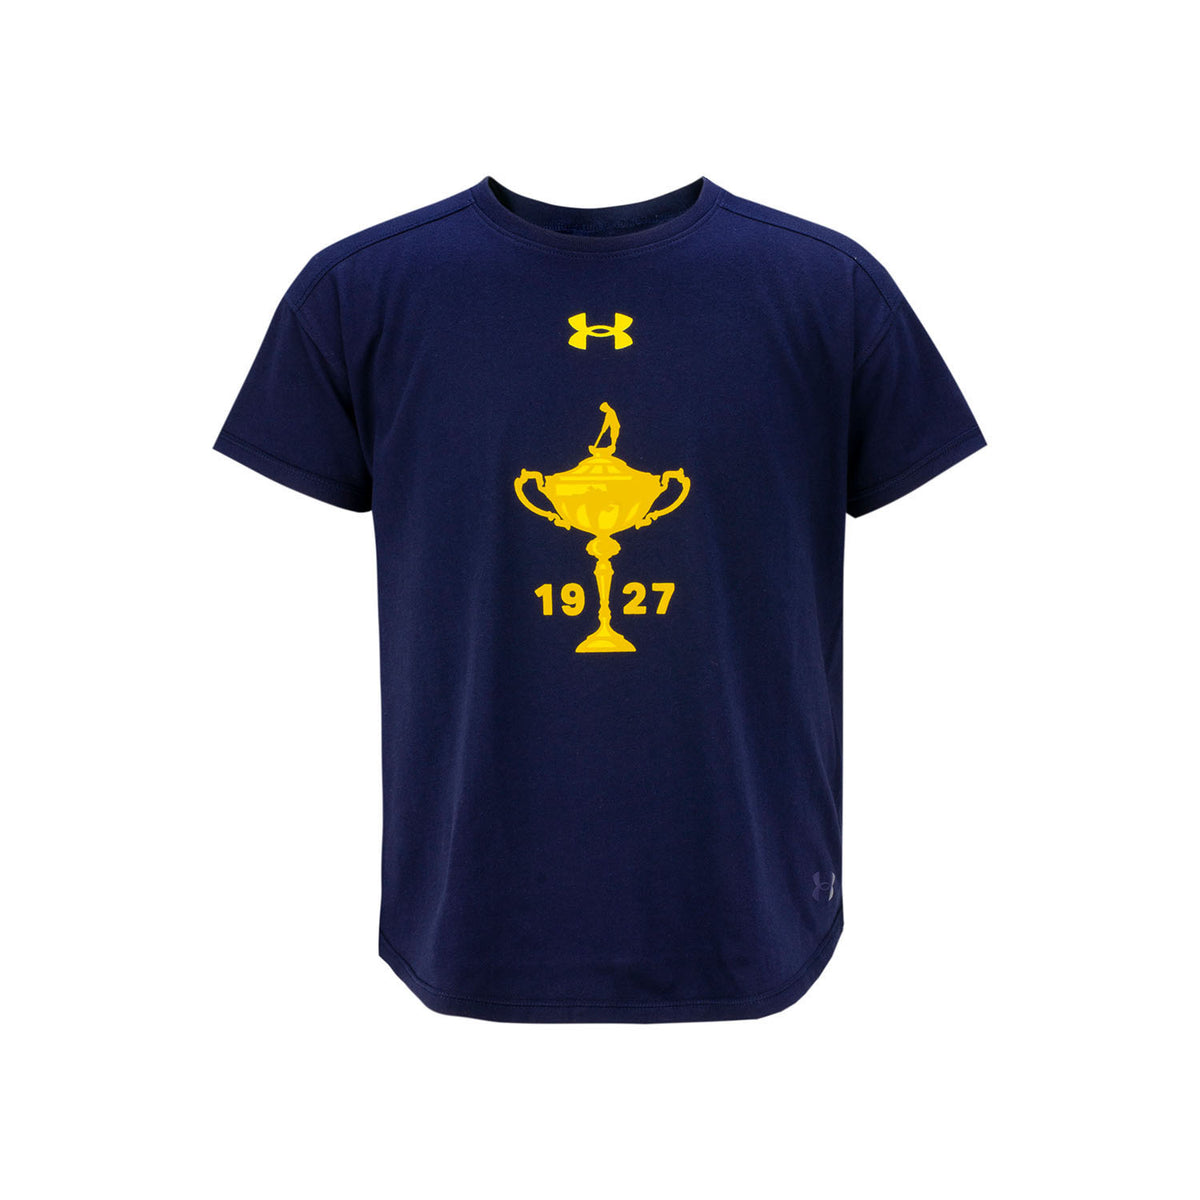 Girls Youth Performance Cotton SS Tee in Navy- Front View